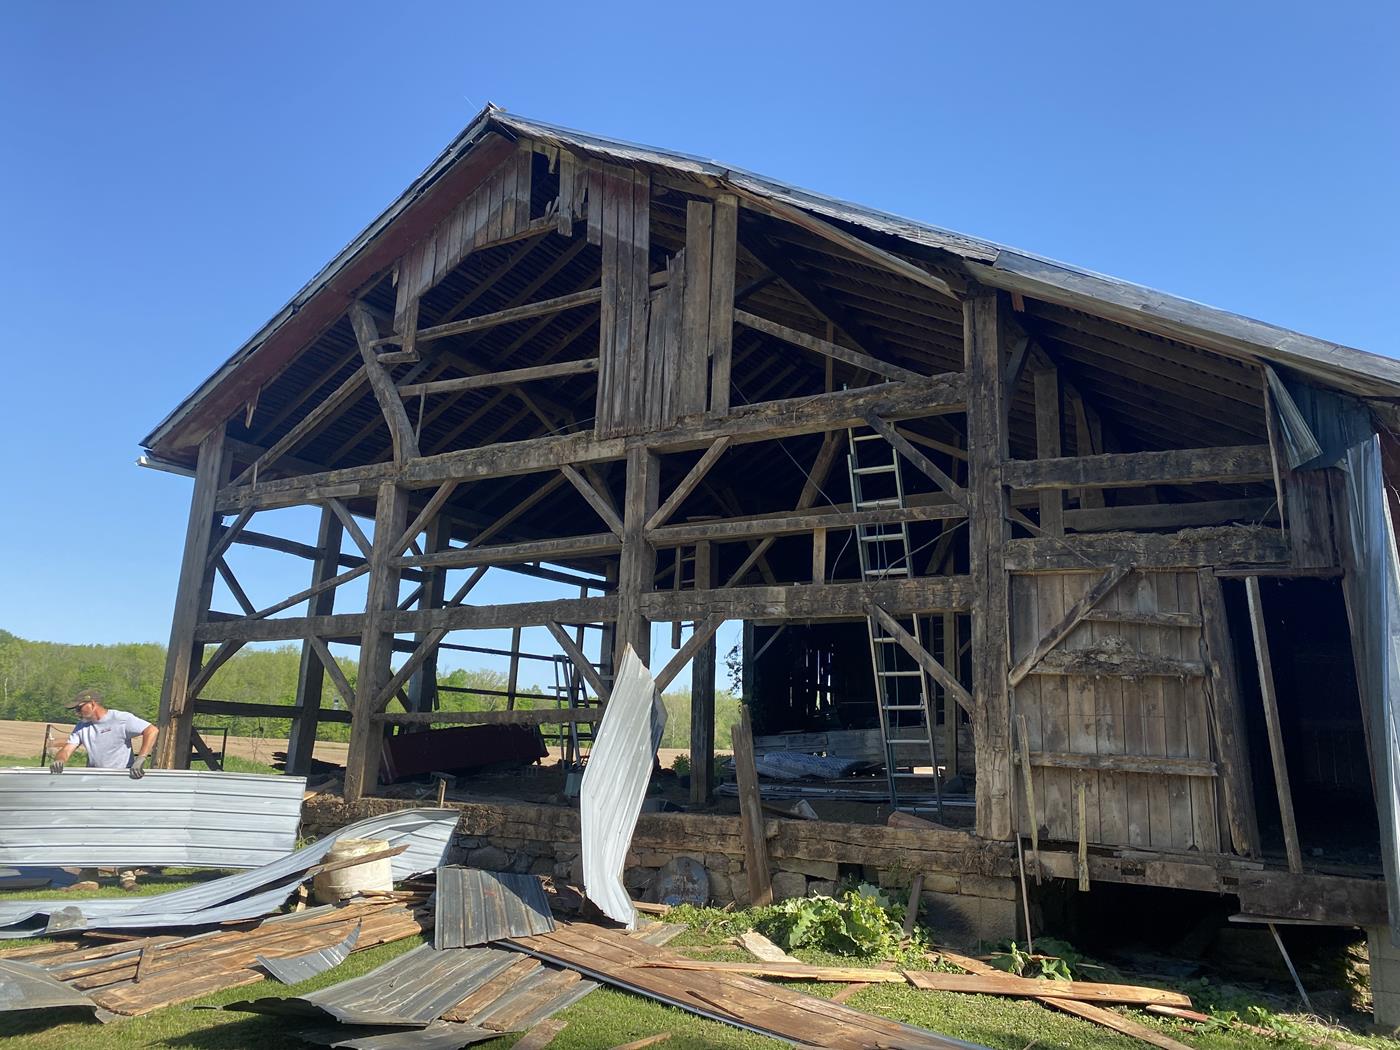 https://www.ohiovalleybarnsalvage.com/images/Harvey Barn Frame Ohio Valley Barn Salvage - Your Source For Sawn Barn Timbers